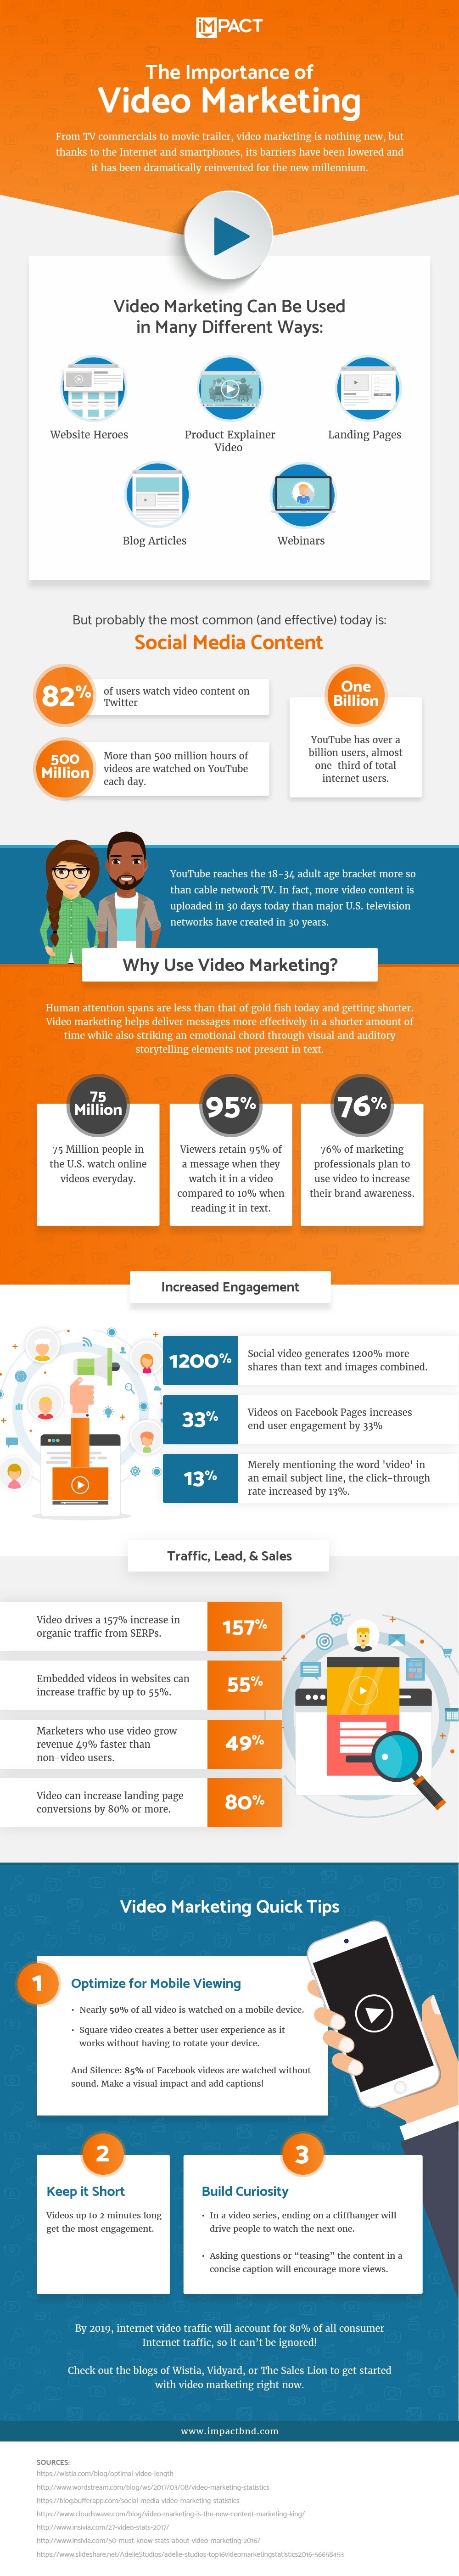 Video Content is King: The Importance of Video Marketing [Infographic]